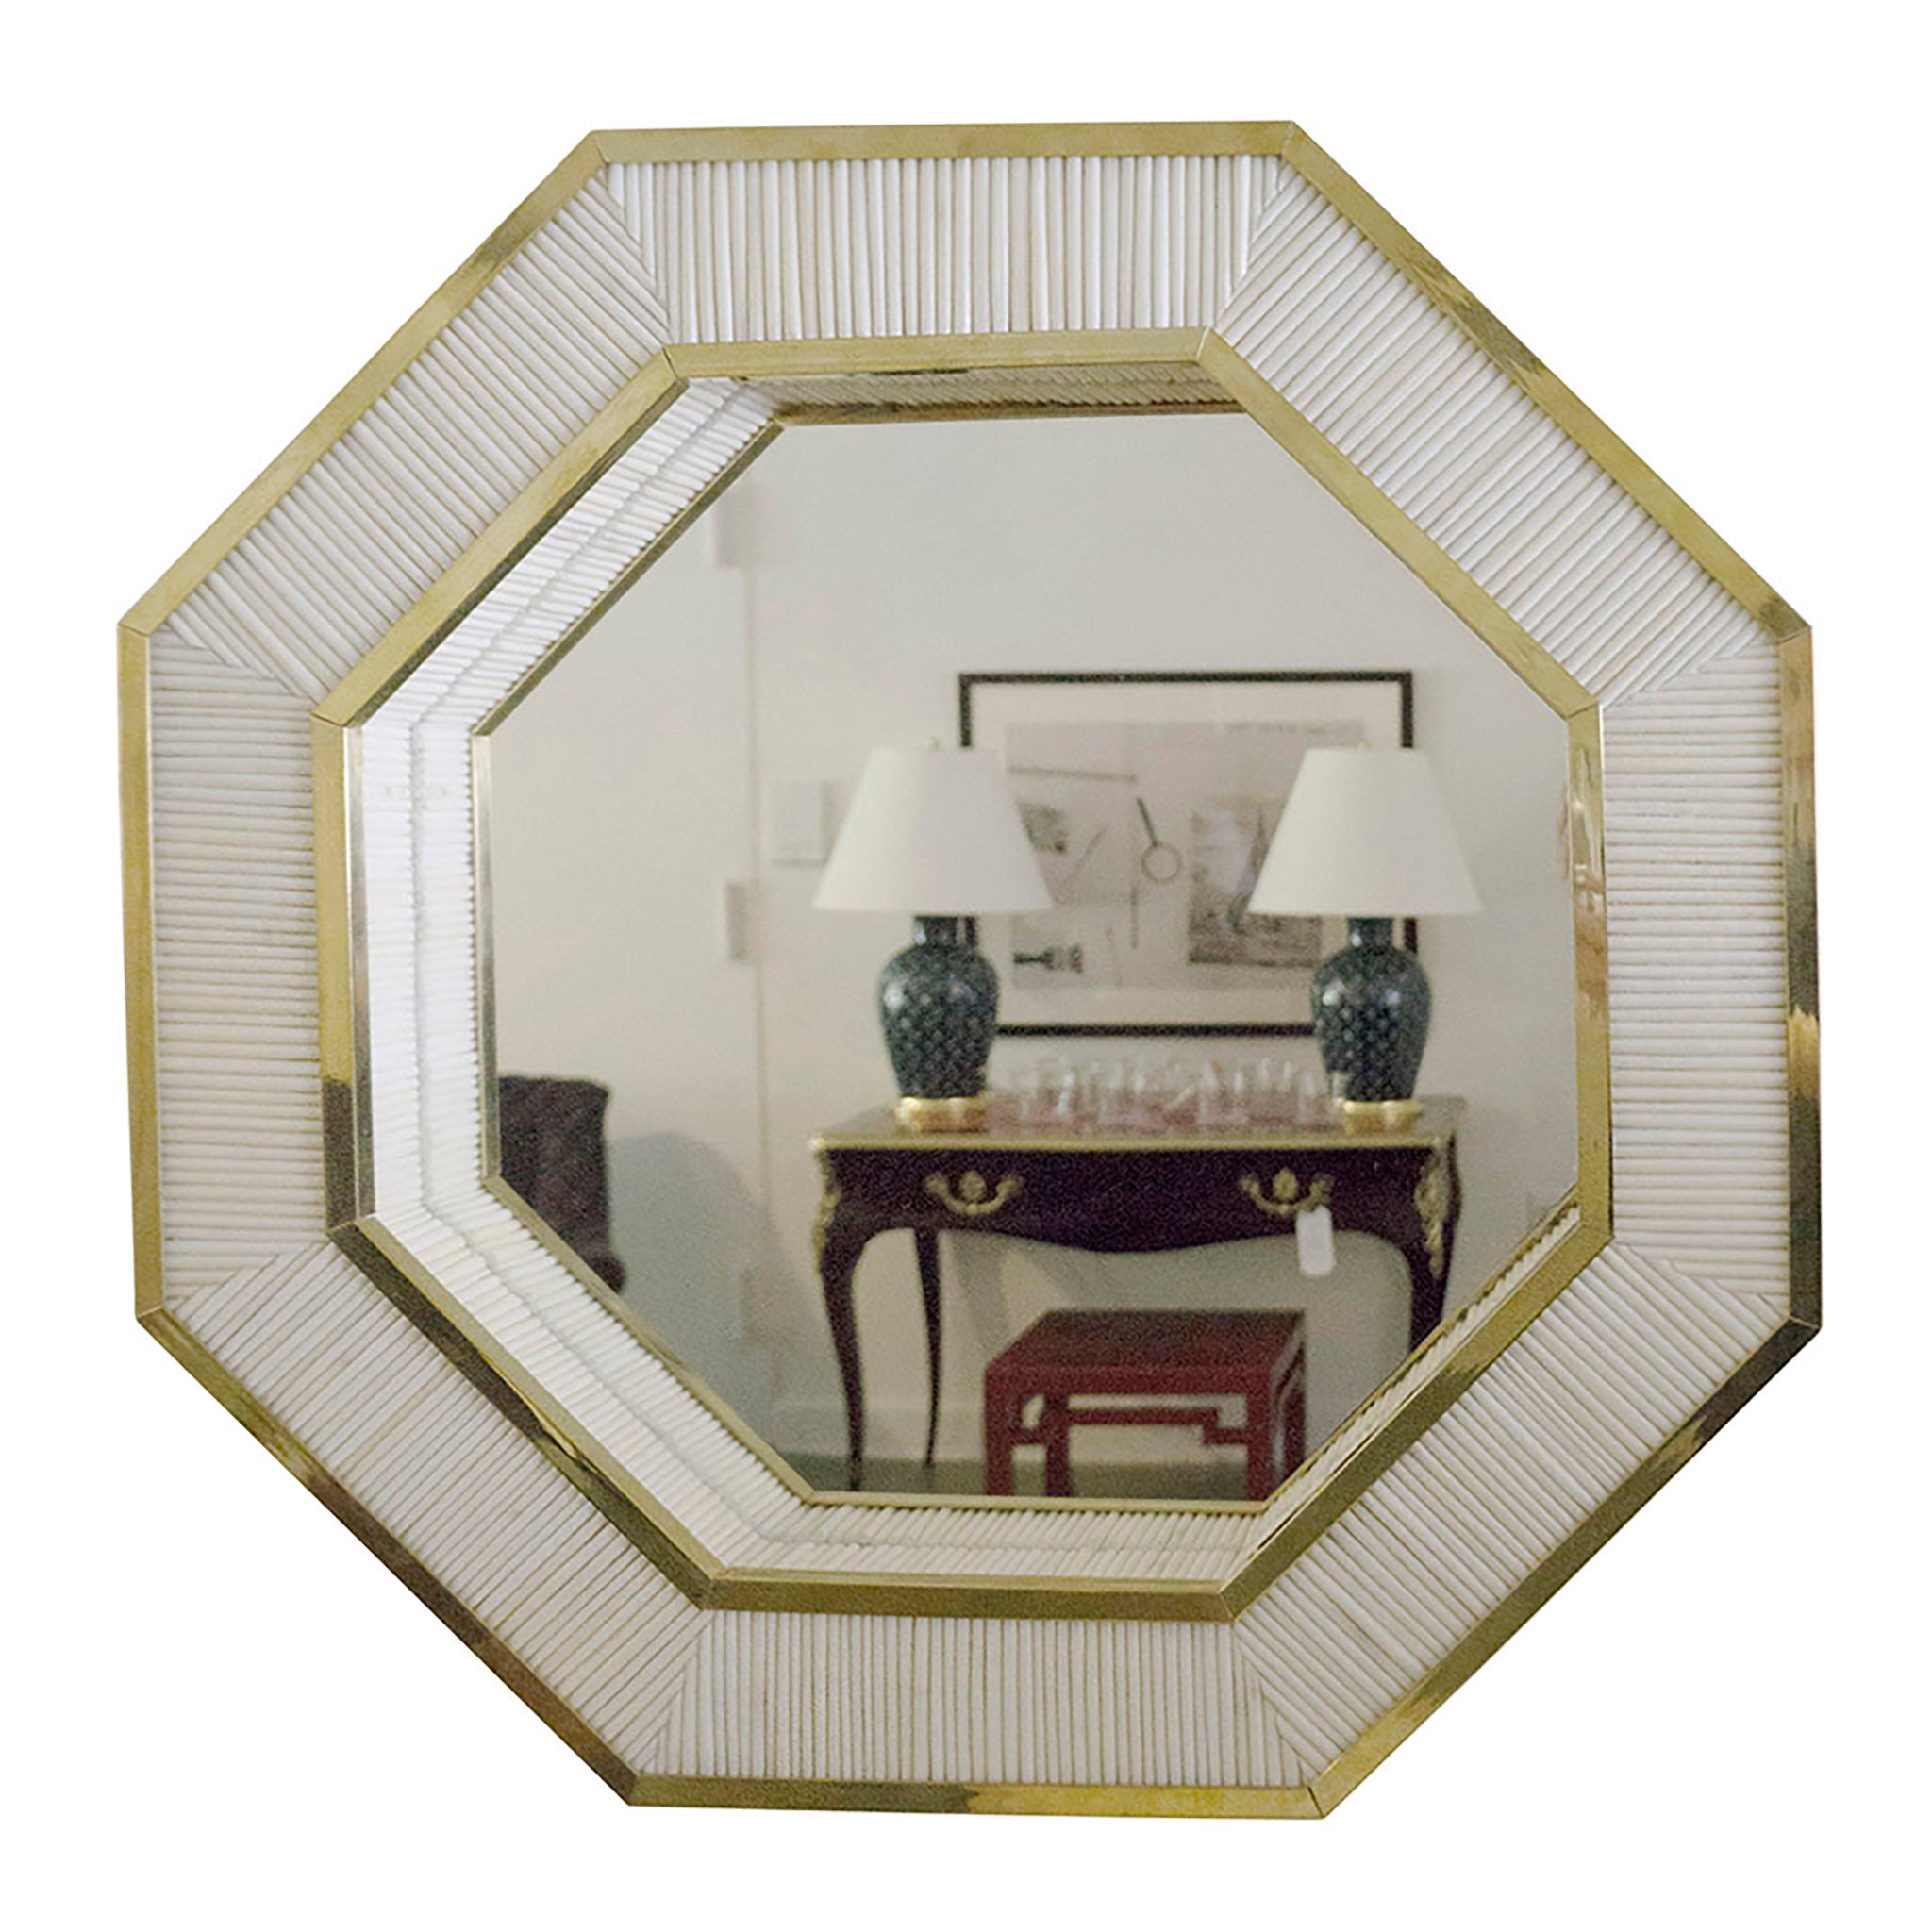 Octagonal Albino Porcupine Quill Mirror with Polished Brass Trim